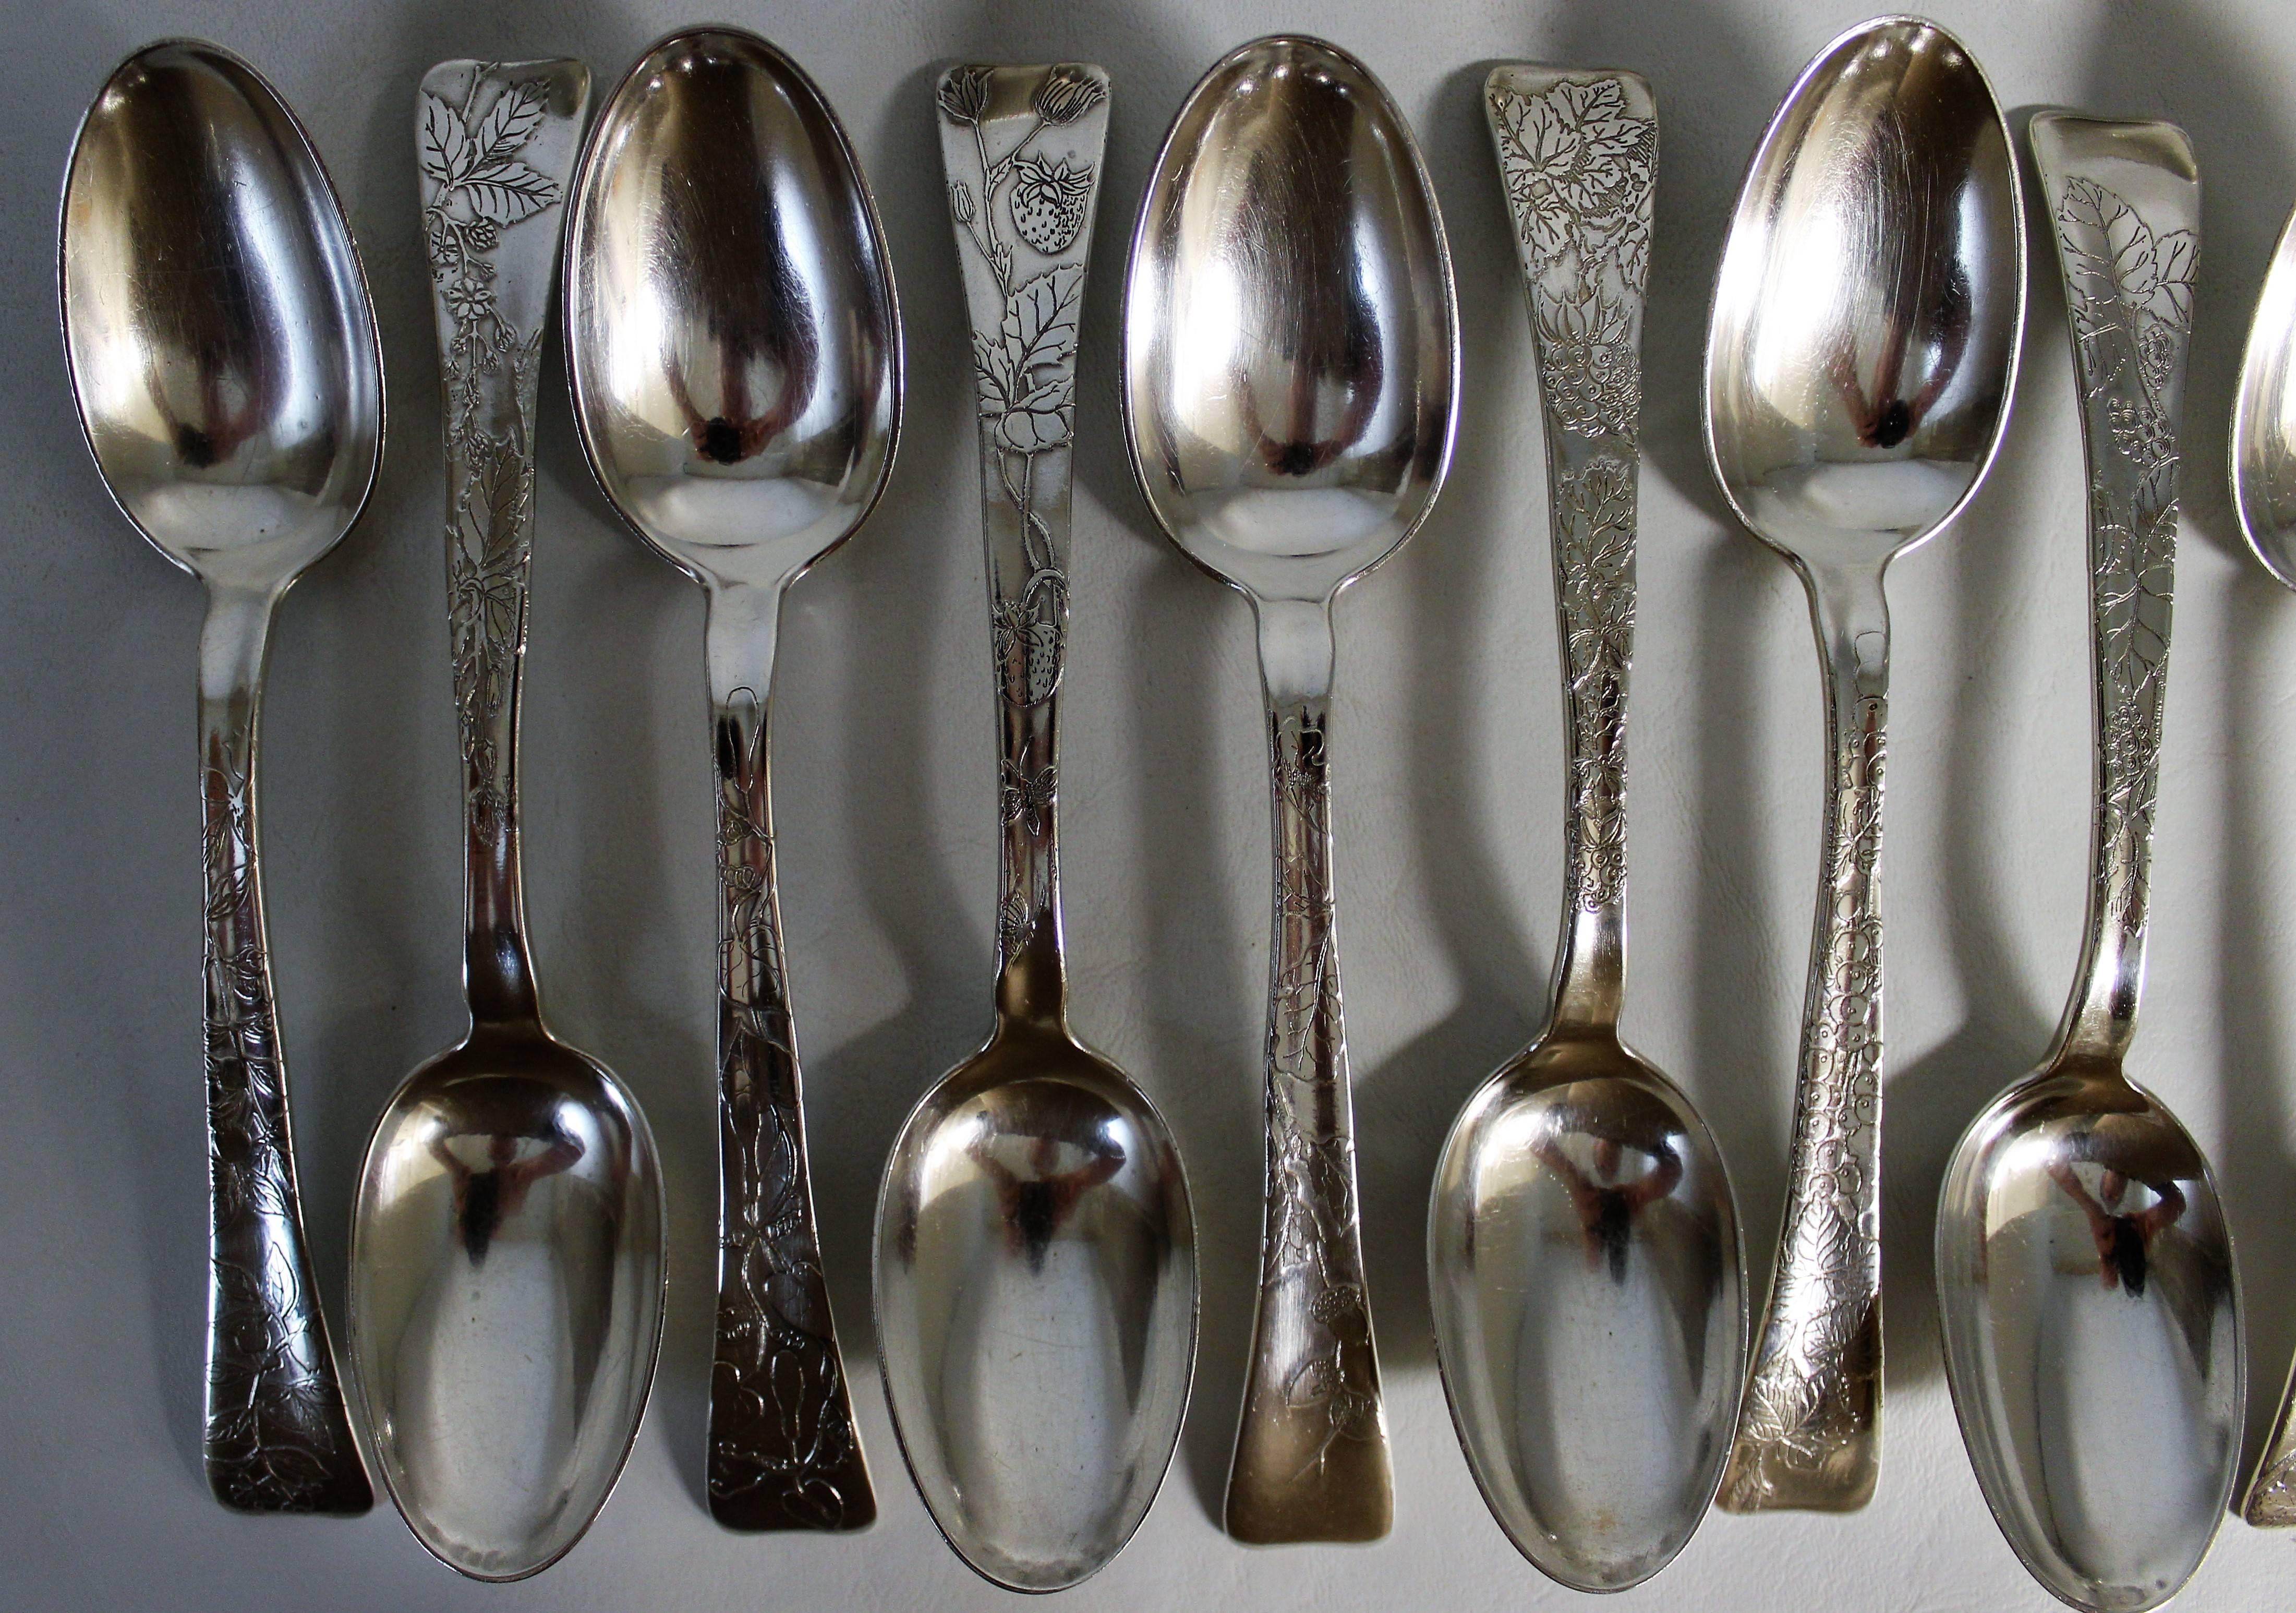 American Tiffany 'Lap-Over-Edge' Spoons Designed by Charles T. Grosjean